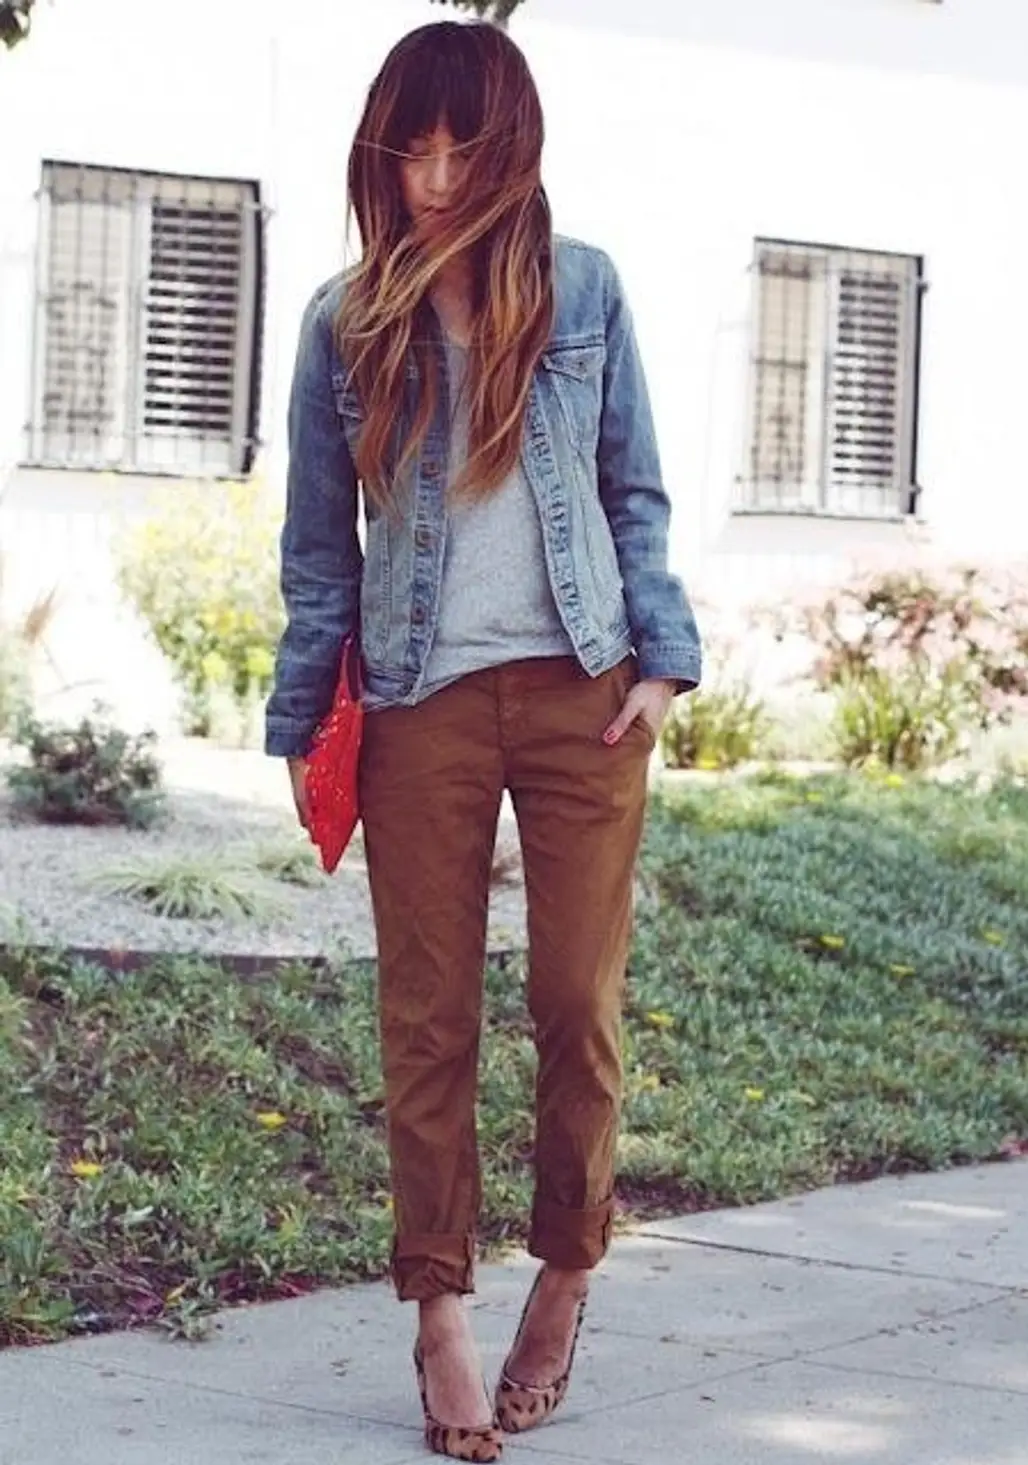 With Khakis and a Spring Top